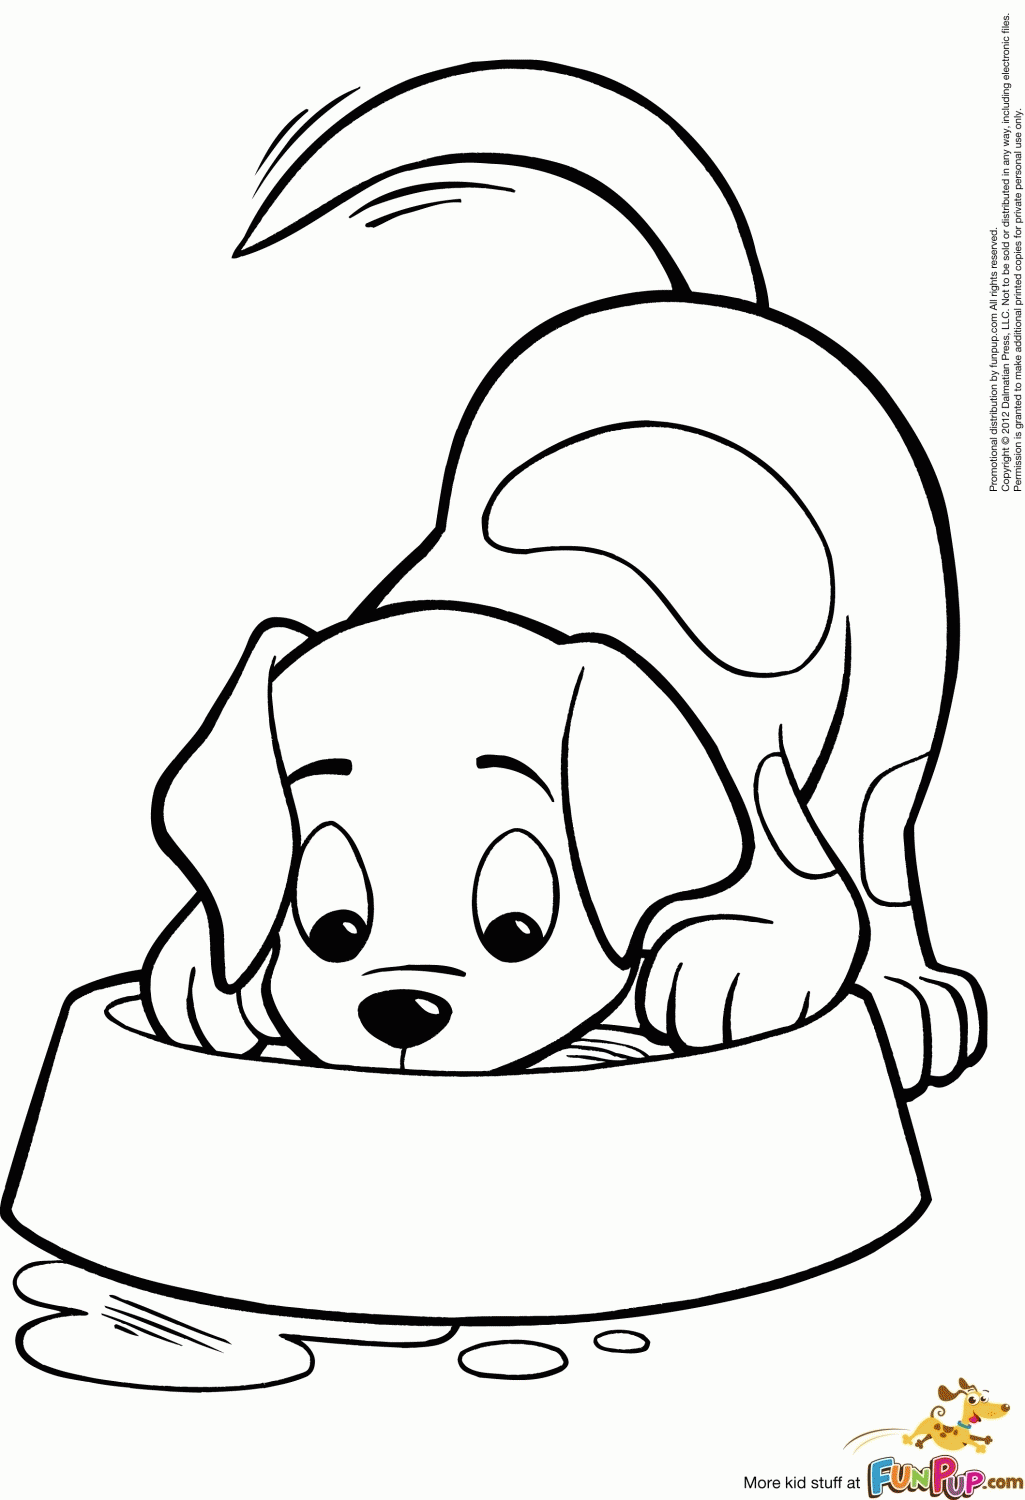 Elegant Cute Kitten And Puppy Coloring Pages Pics Color The Mommy ...